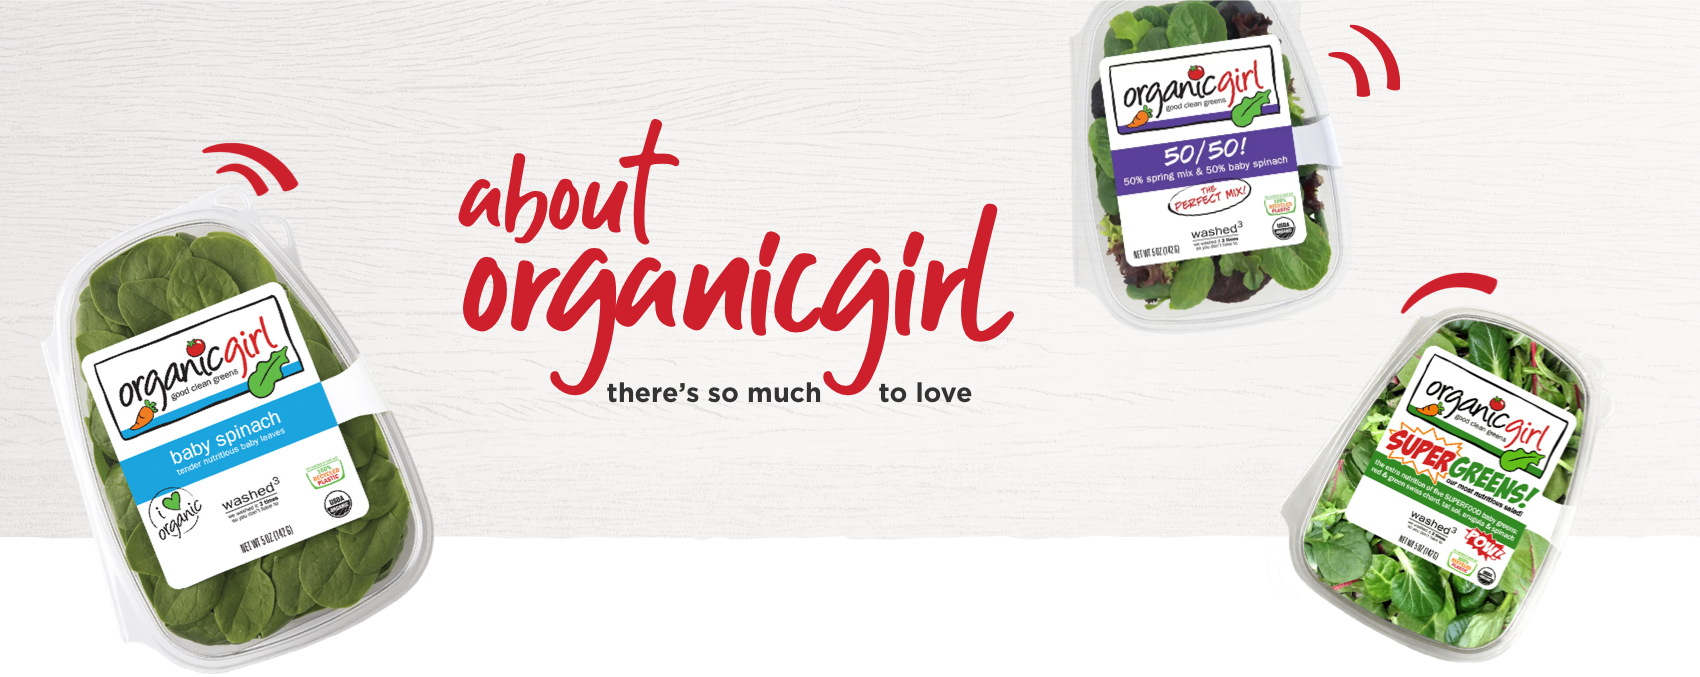 About Organicgirl